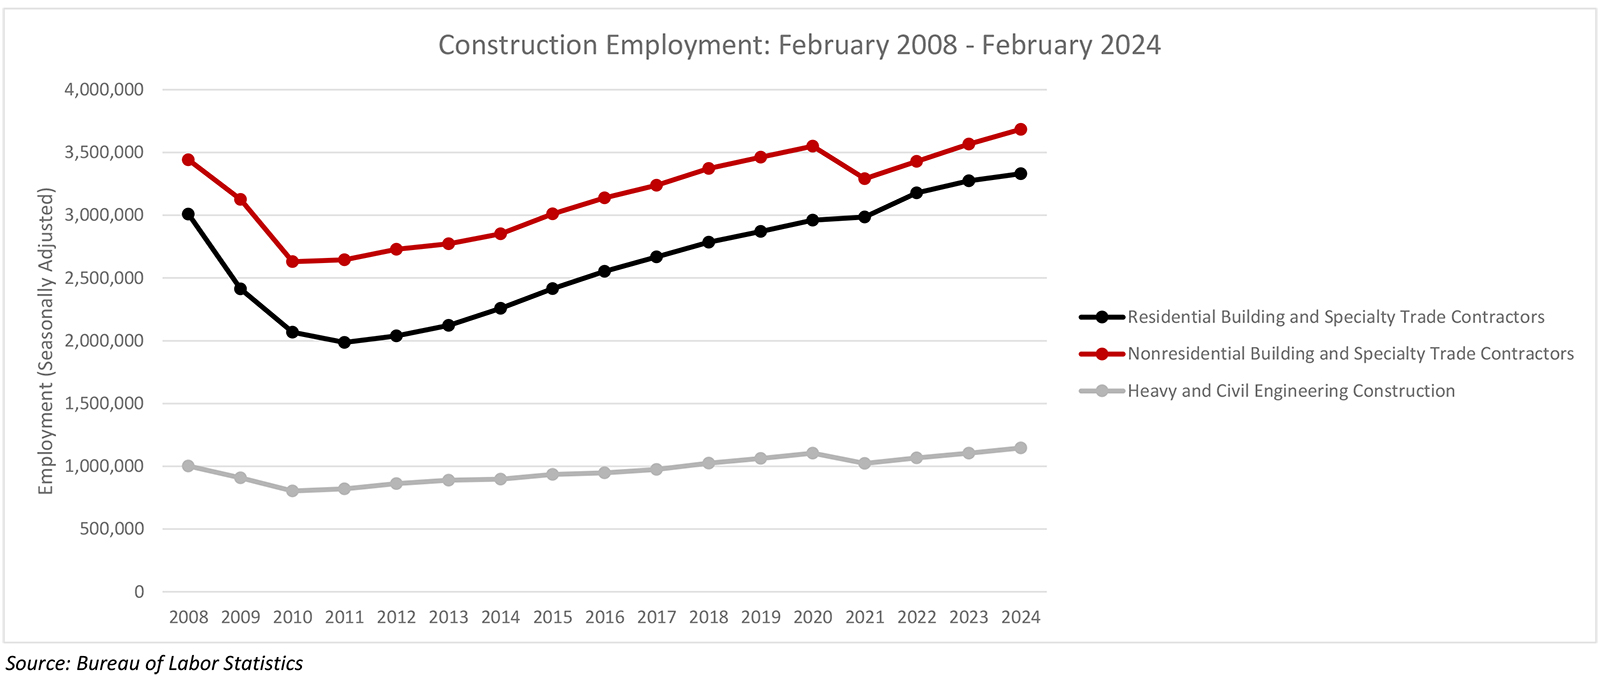 Nonresidential Construction Adds 23,000 Jobs in February